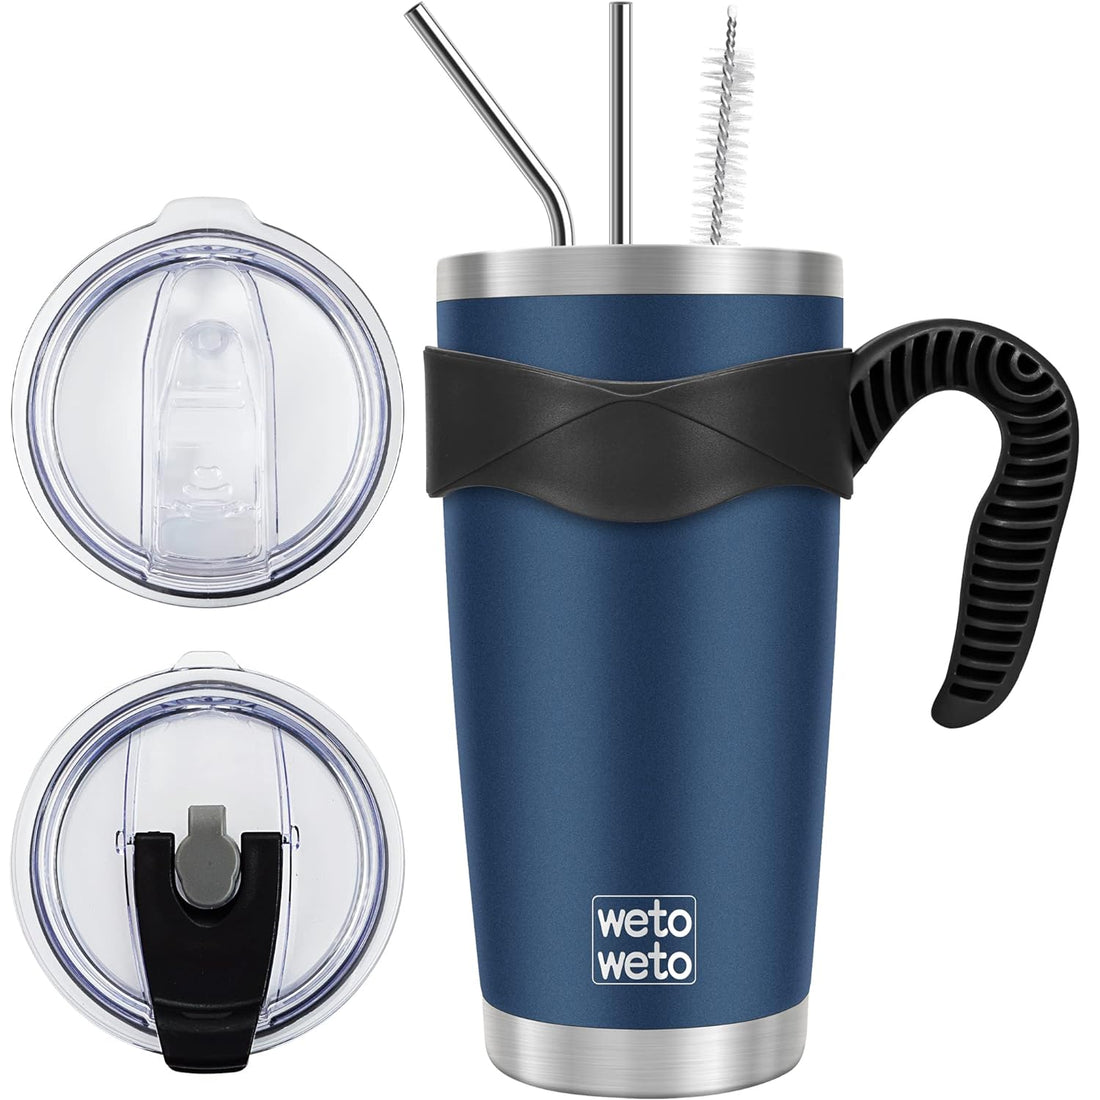 WETOWETO 20oz Tumbler with 2 lids and 2 straws, Stainless Steel Vacuum Insulated Water Coffee Tumbler Cup with Handle, Double Wall Powder Coated Spill-Proof Travel Mug Thermal Cup (Navy Blue, 1 Pack)